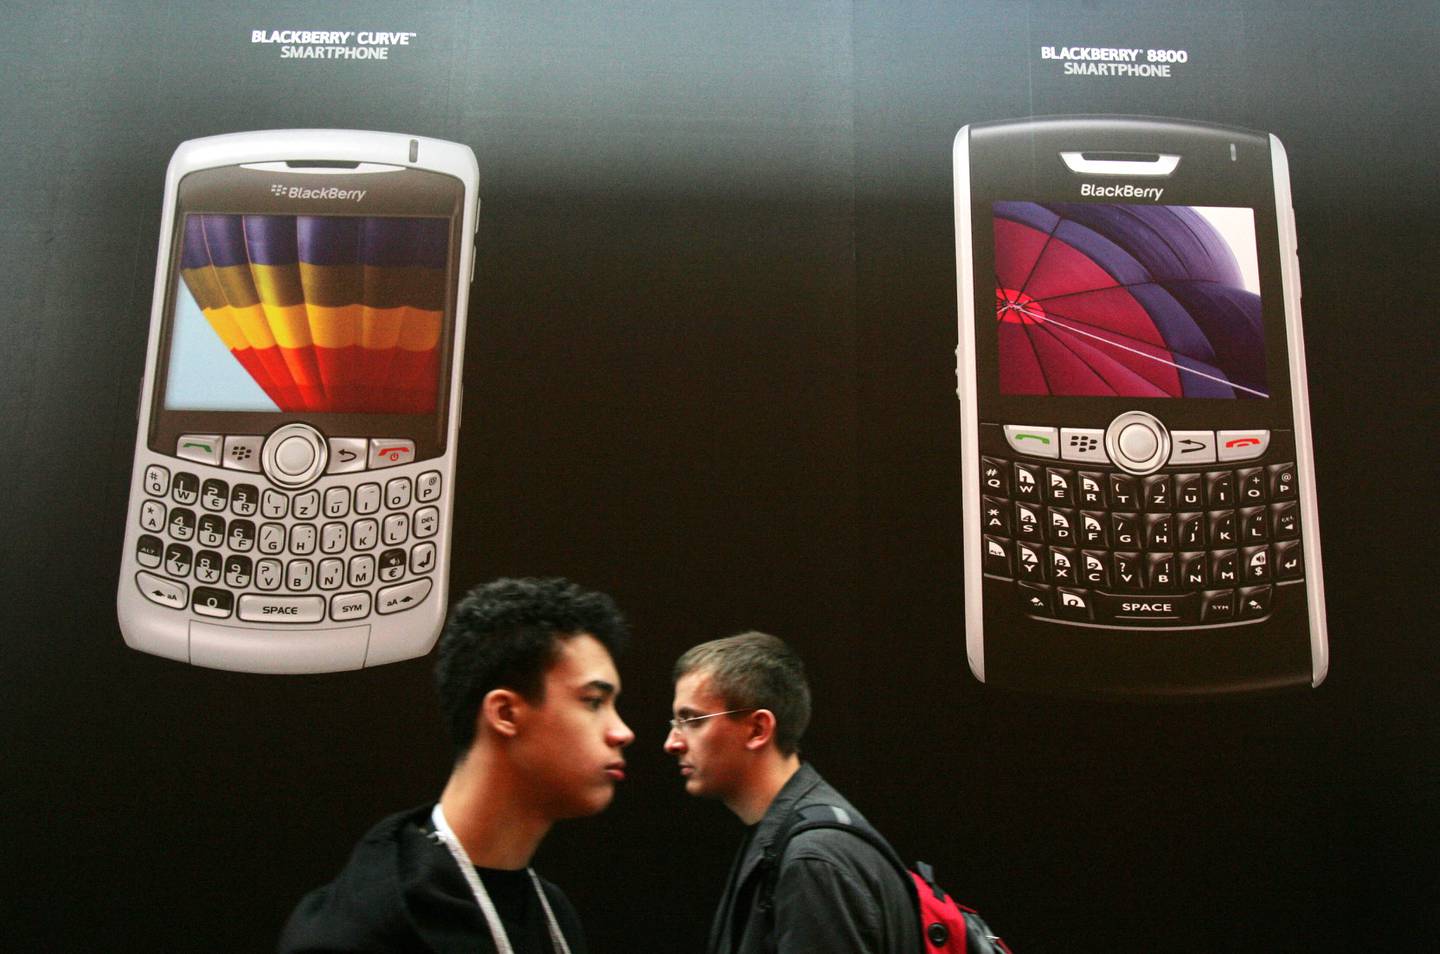 People walk past the BlackBerry stand at a trade fair in Hanover, Germany on March 4, 2008. AFP